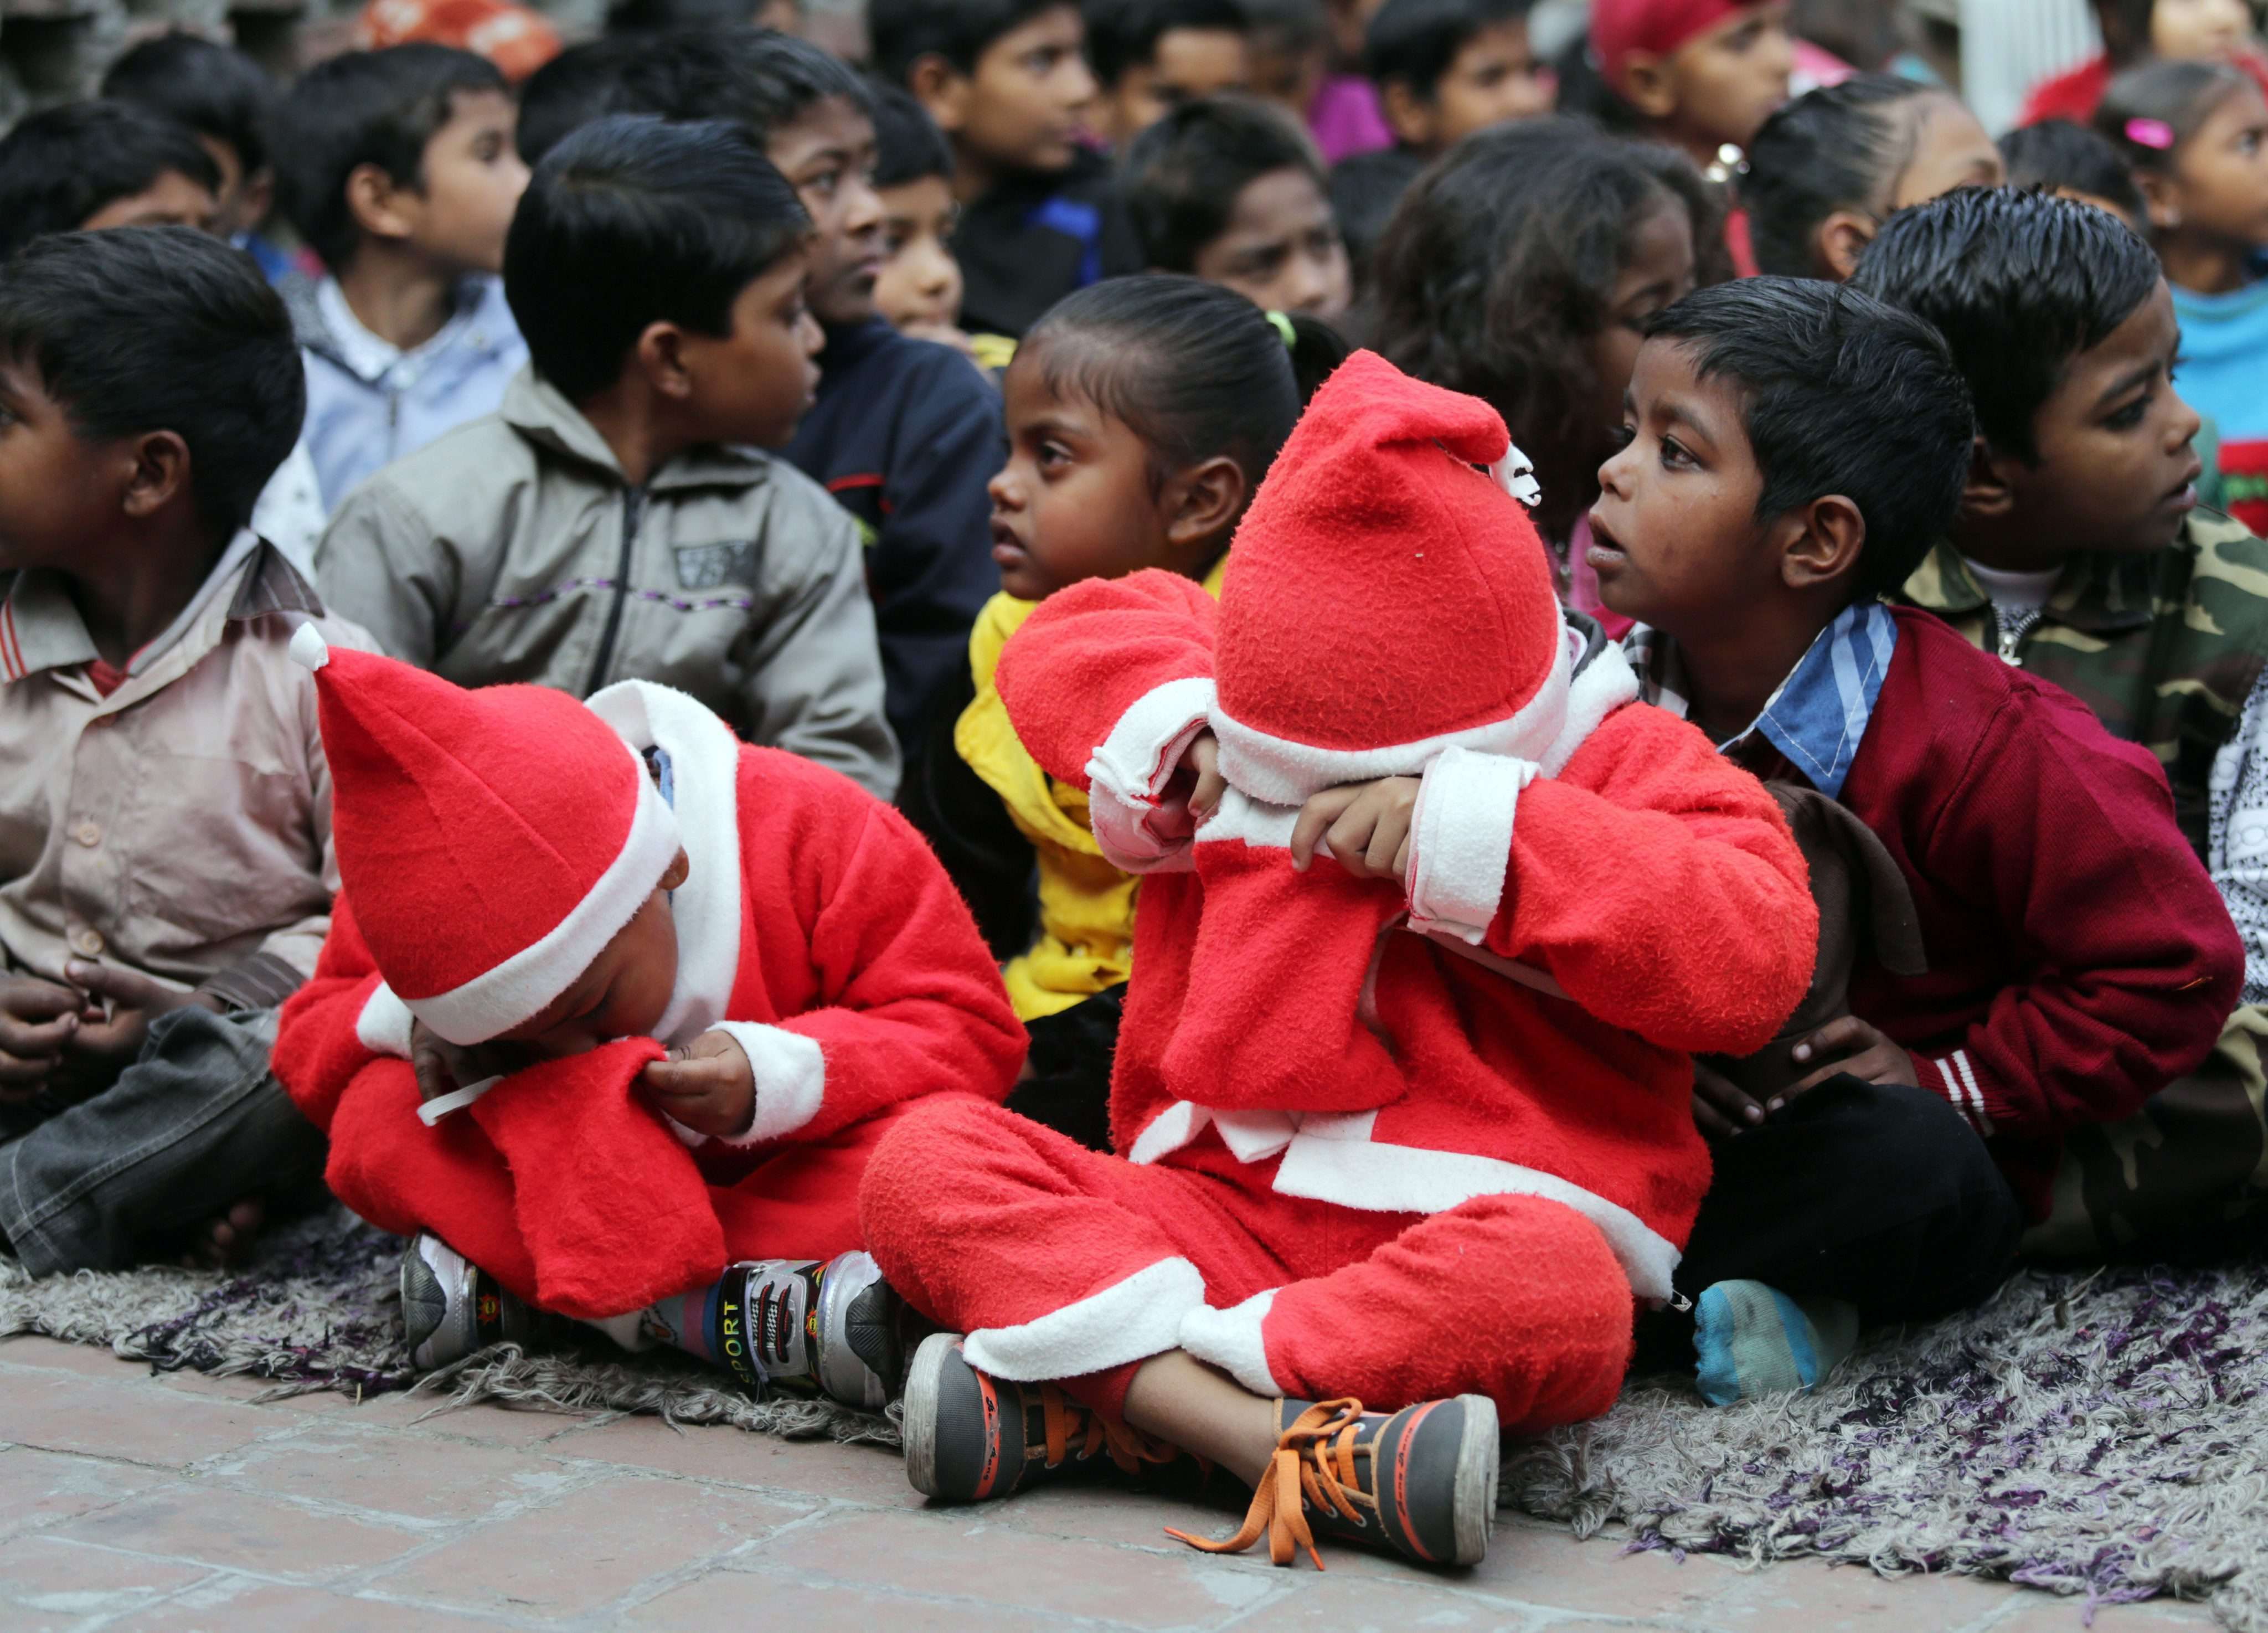 Children dressed as Santa Claus peer into their goodie bags as they take part in Christmas celebrations with underprivileged children, organised by an education-focused NGO in Amritsar, India, on Christmas Day. Many of the slum children studying under the guidance of the NGO work as day labourers or rag pickers. Photo: EPA